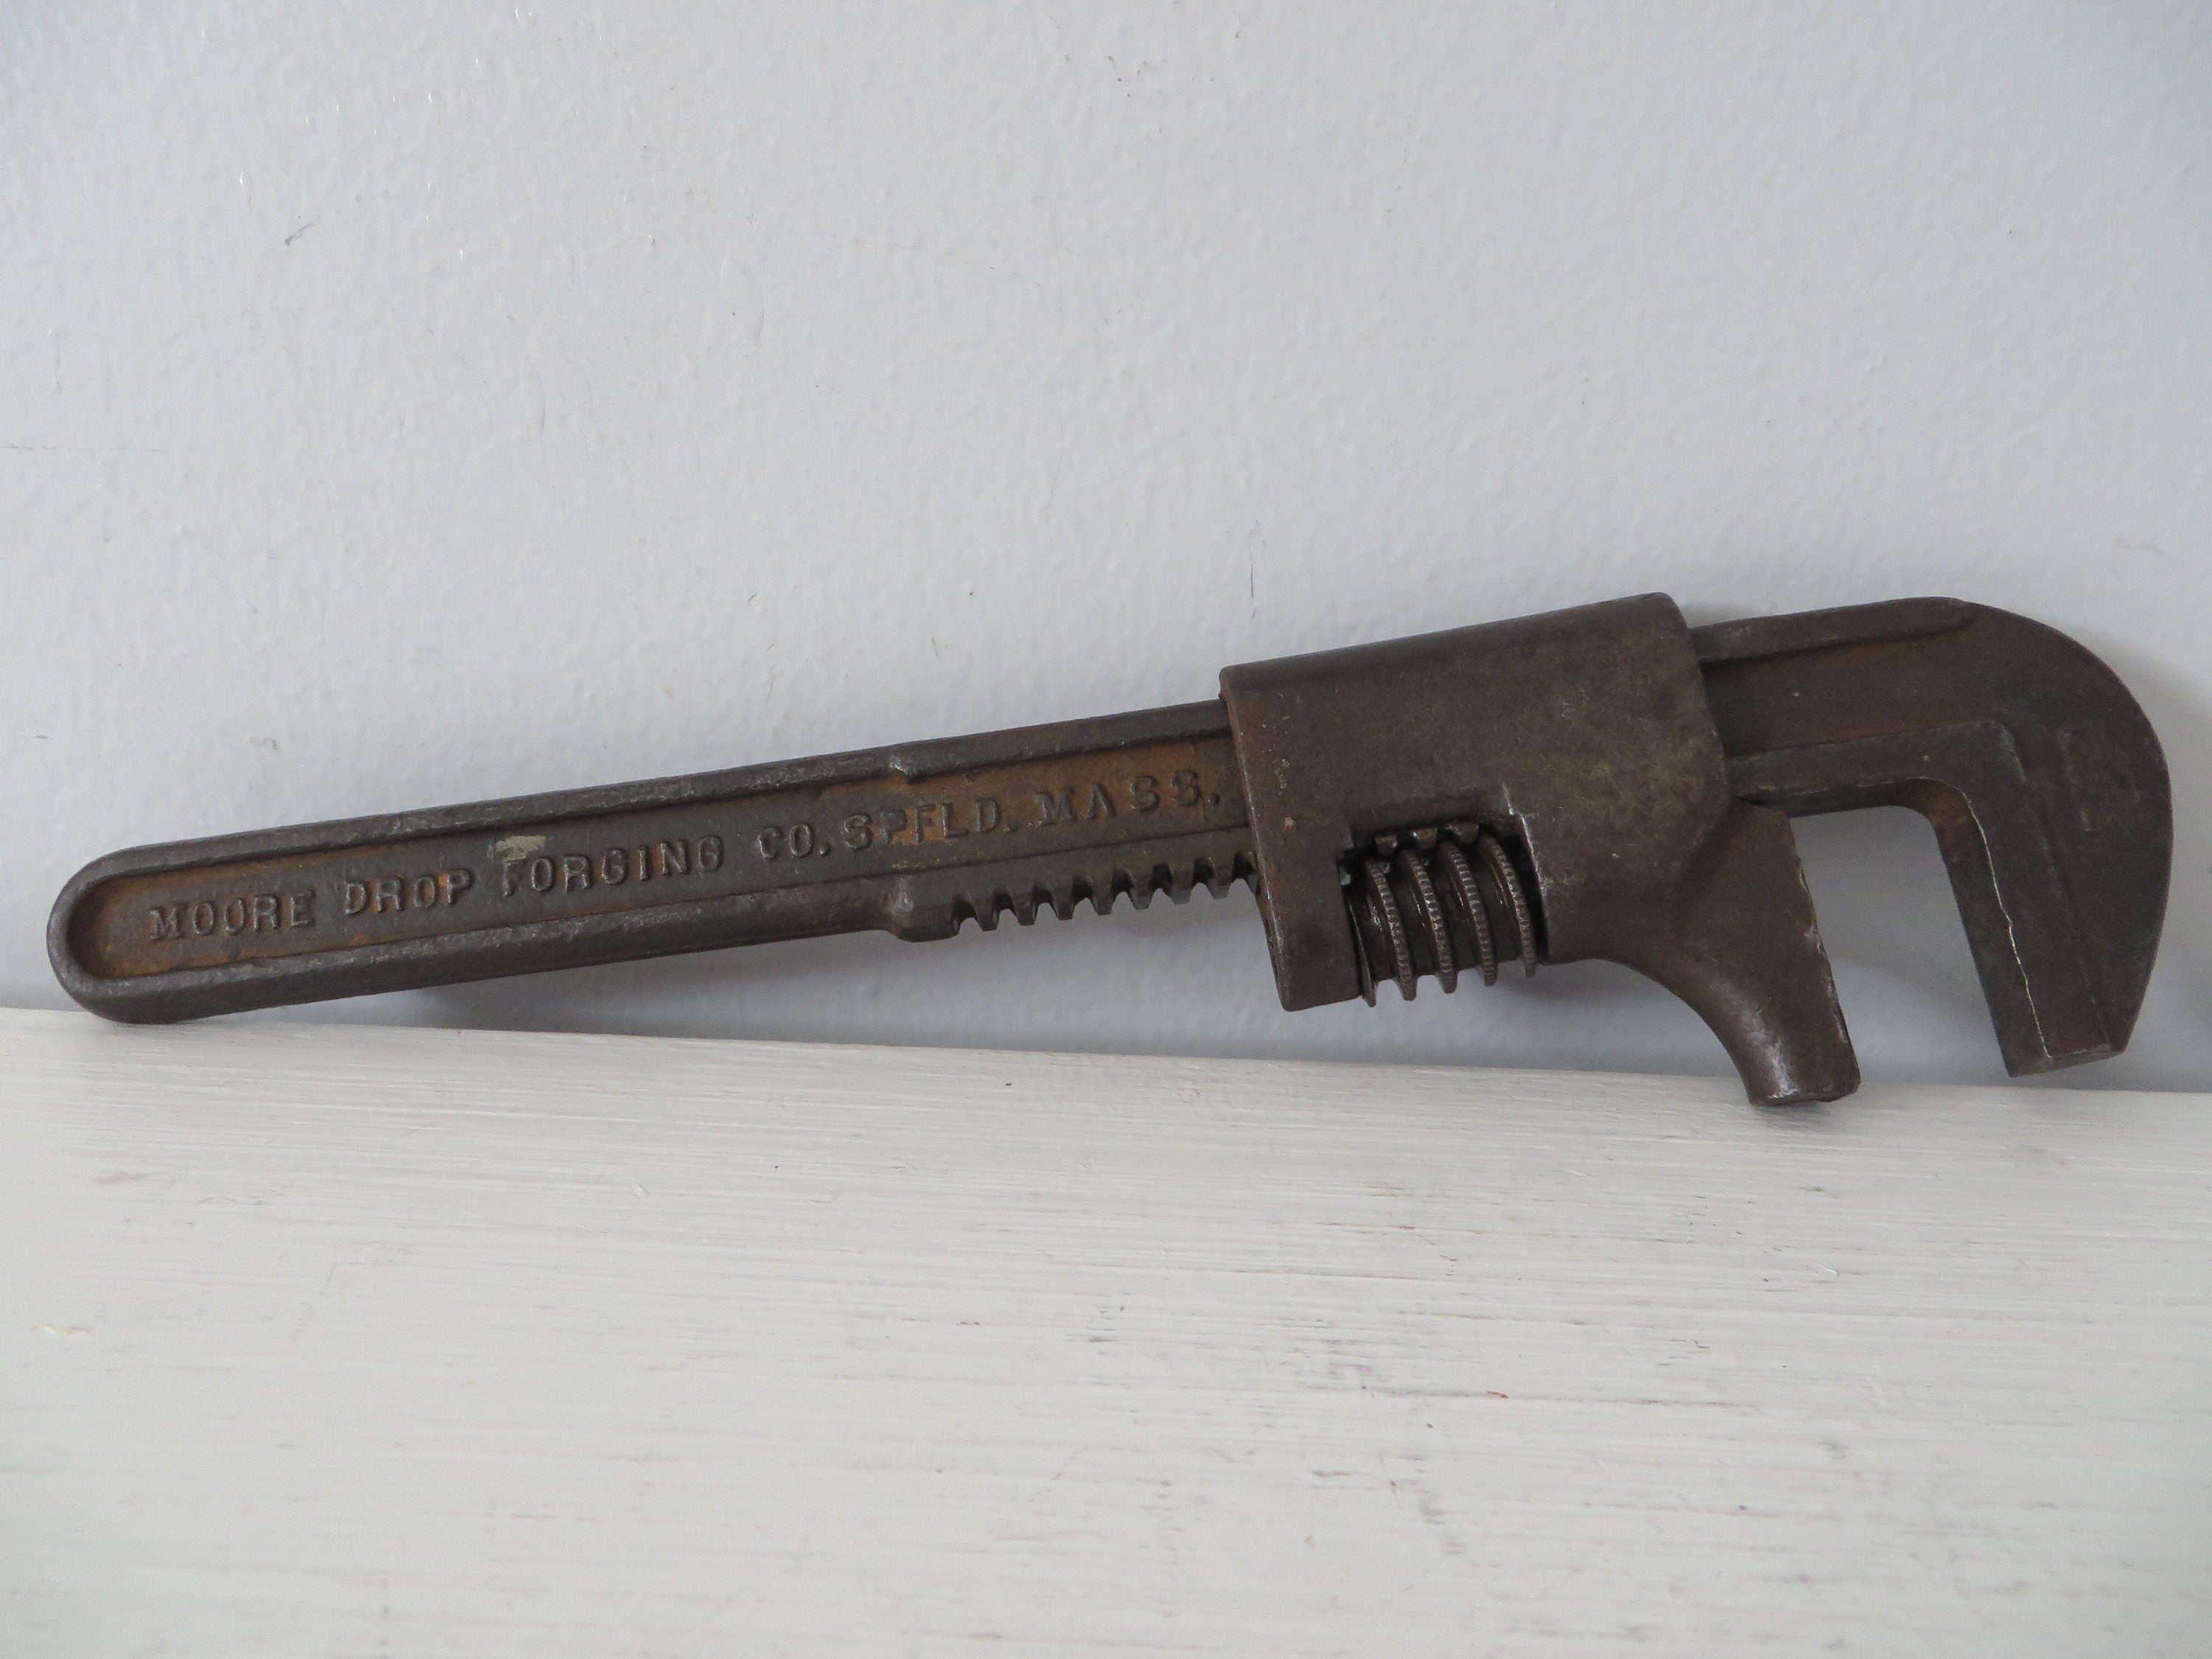 Large Vintage 14” F Monkey Wrench Made in Britain – Good Condition